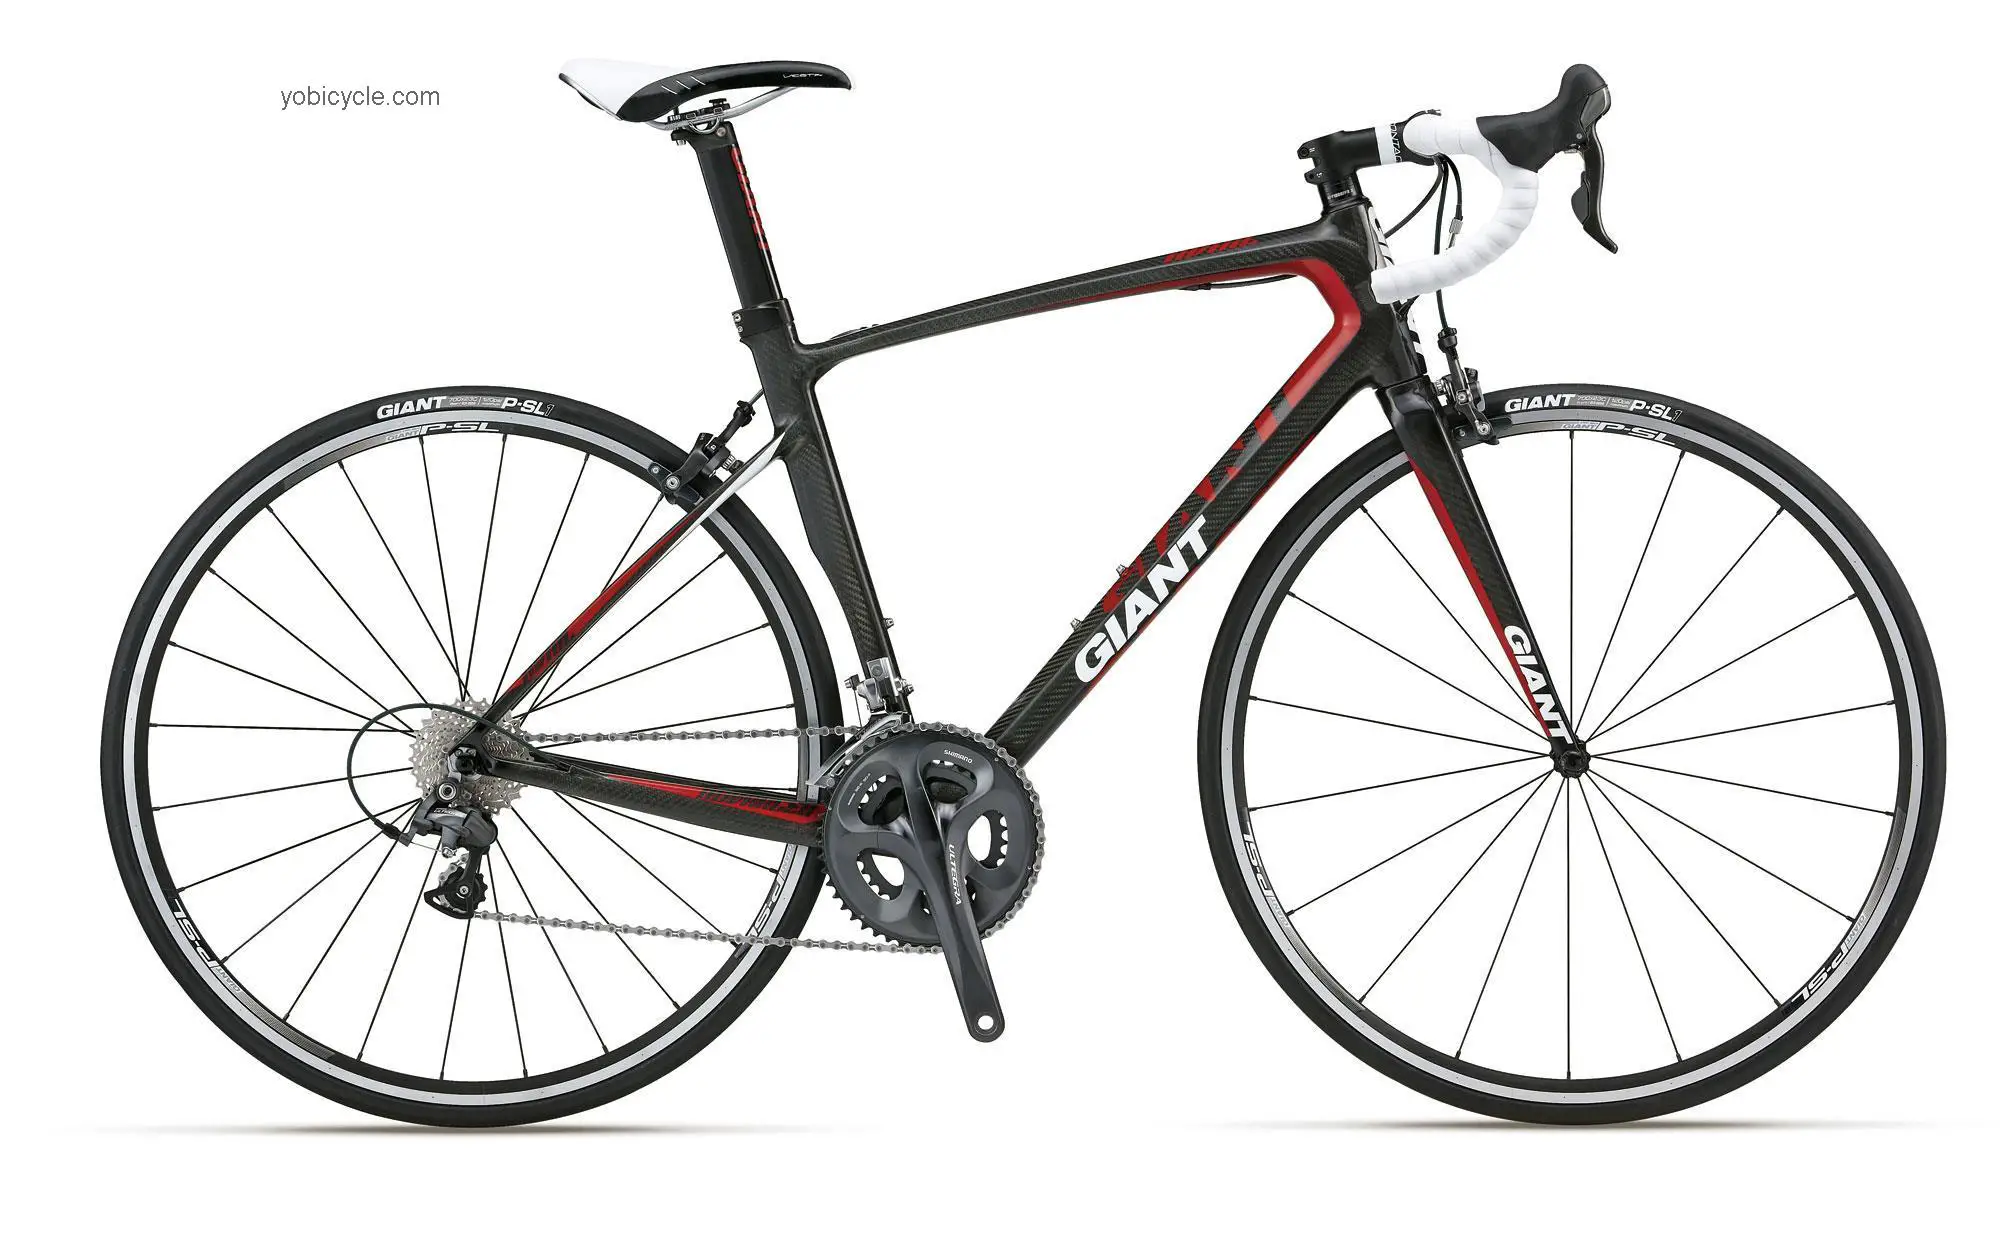 Giant Avail Advanced 2 2012 comparison online with competitors